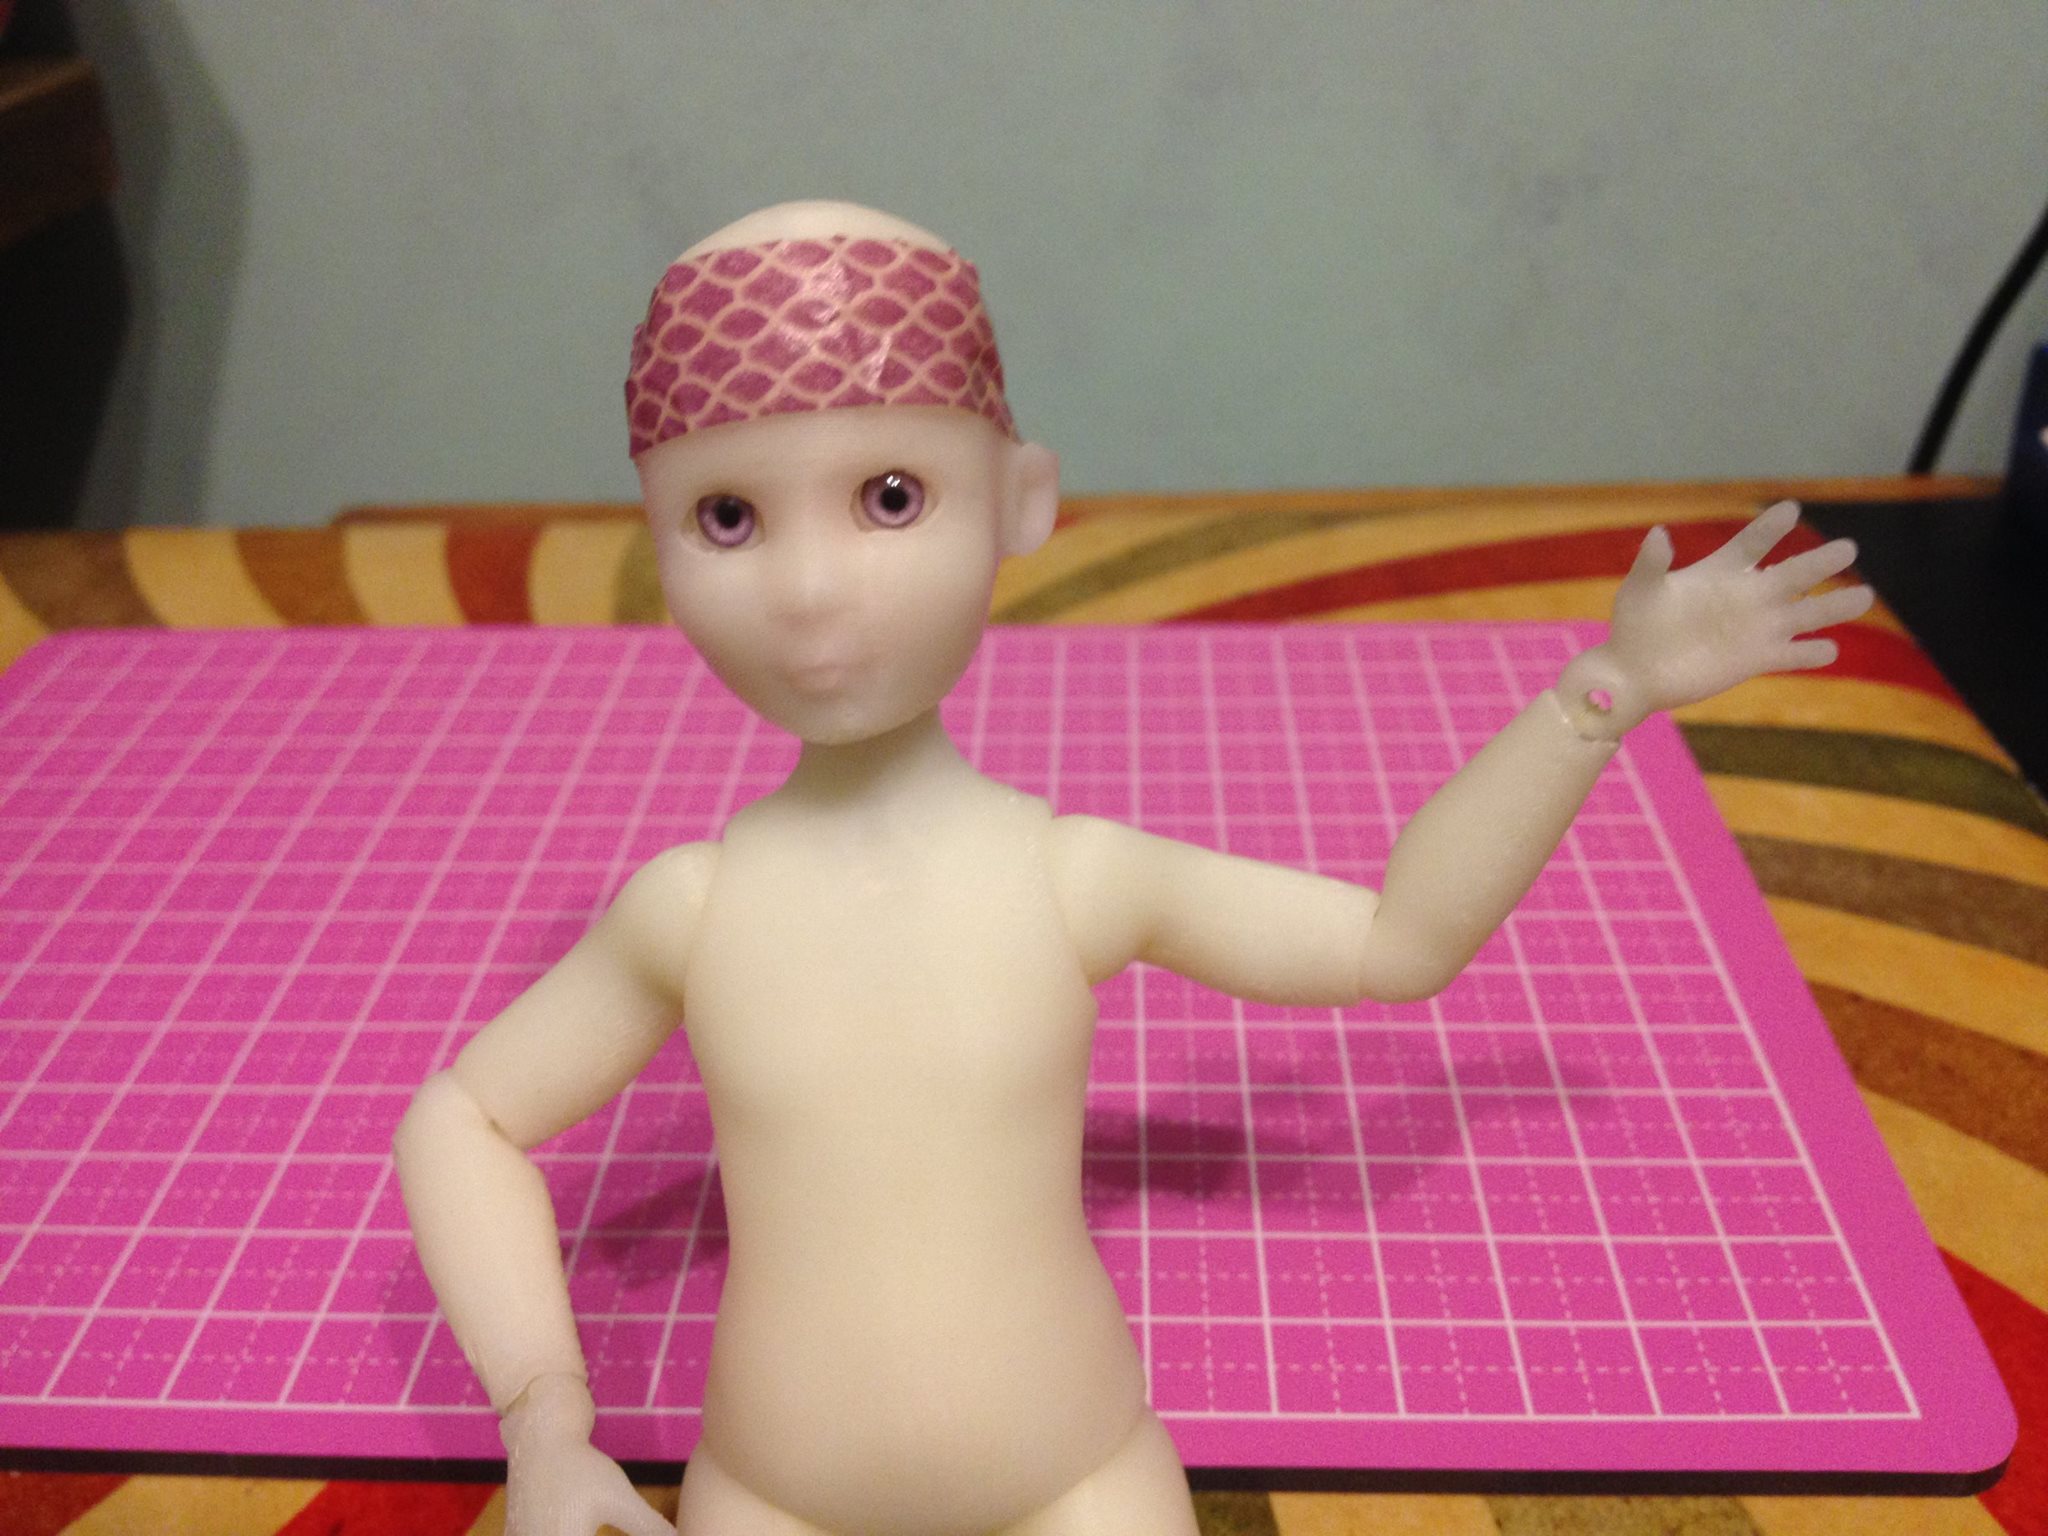 designing-a-3d-printed-doll-2